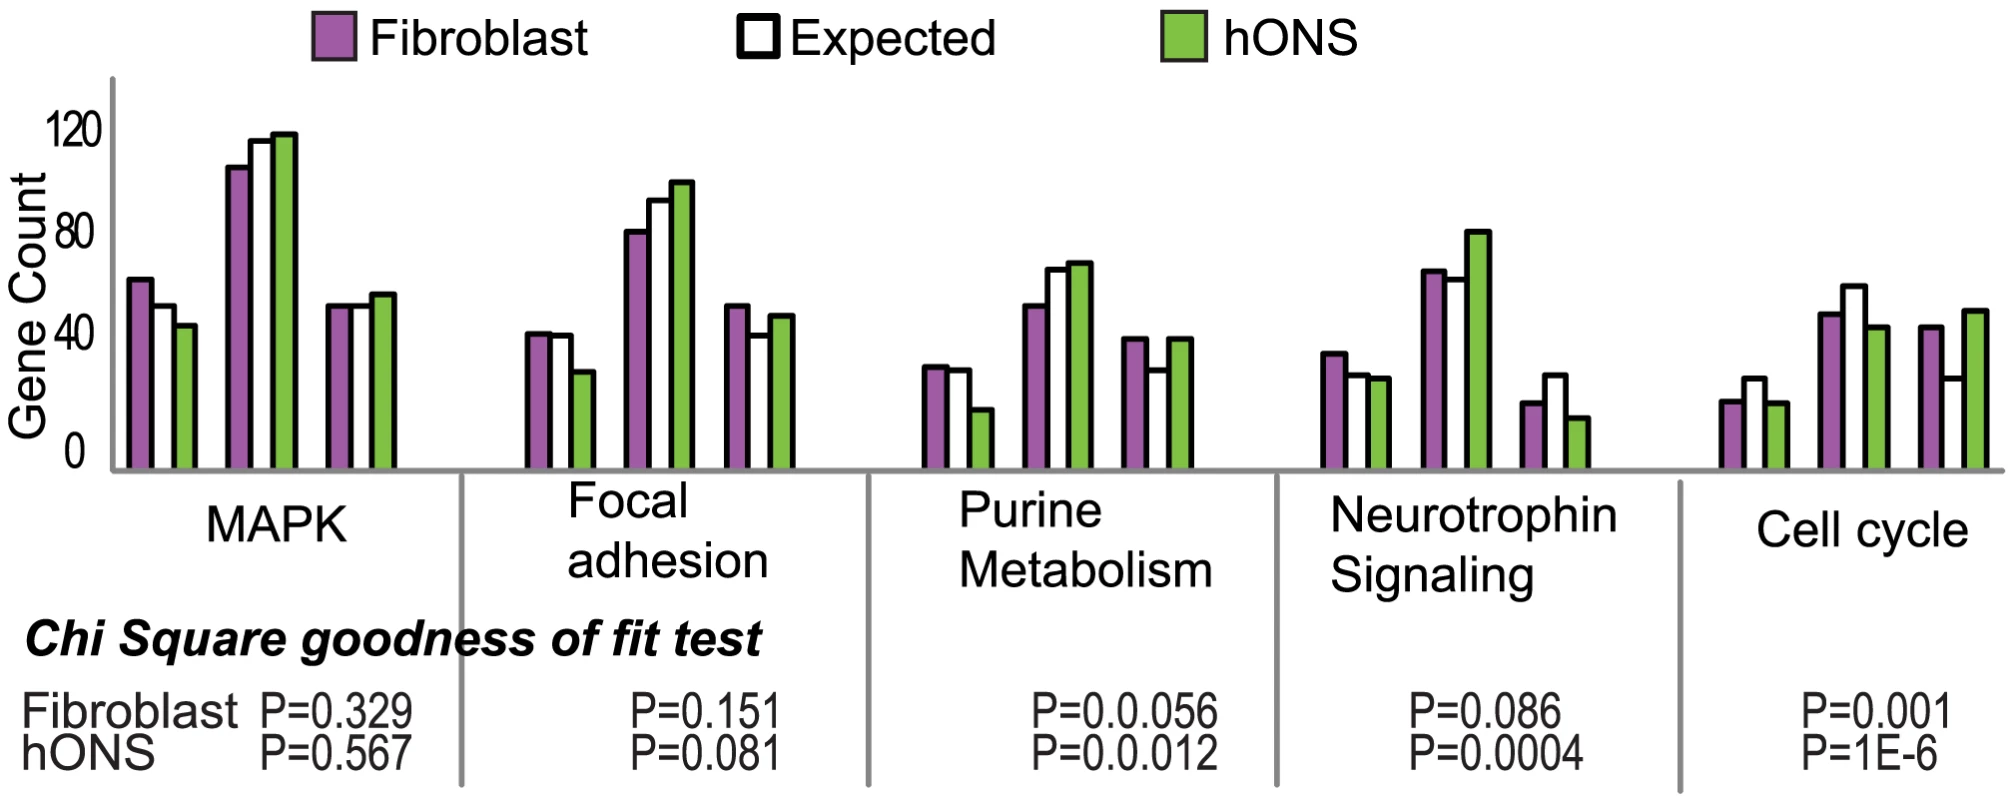 Distribution of variance patterns in the top 5 attract pathways for hONS and fibroblast cells.